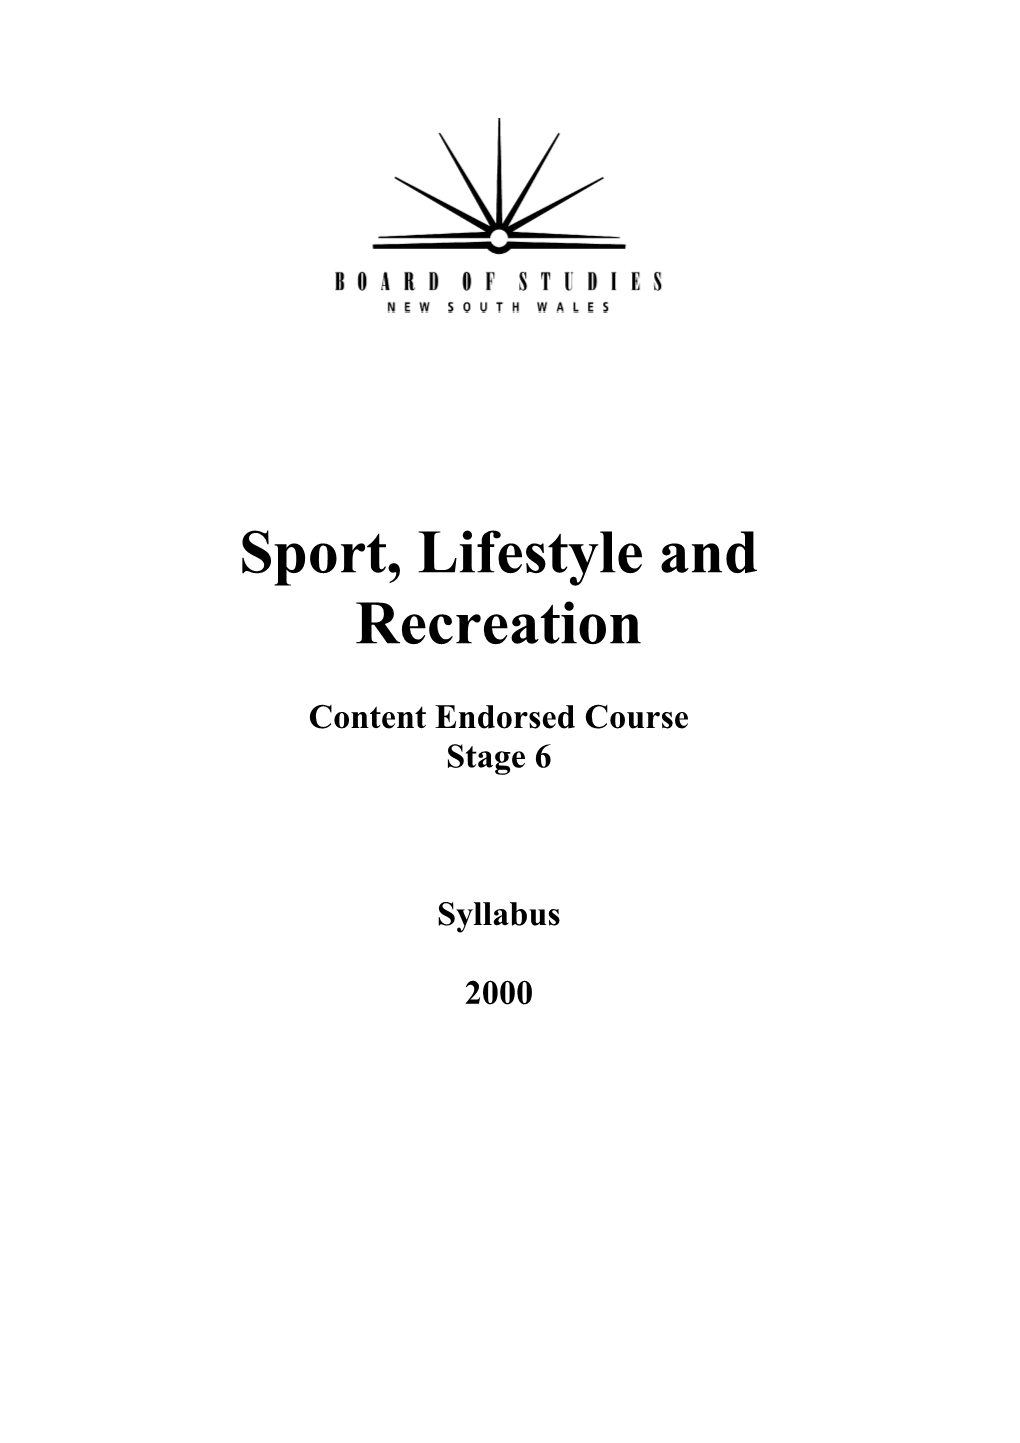 Sport, Lifestyle and Recreation - Content Endorsed Course - Stage 6 Syllabus